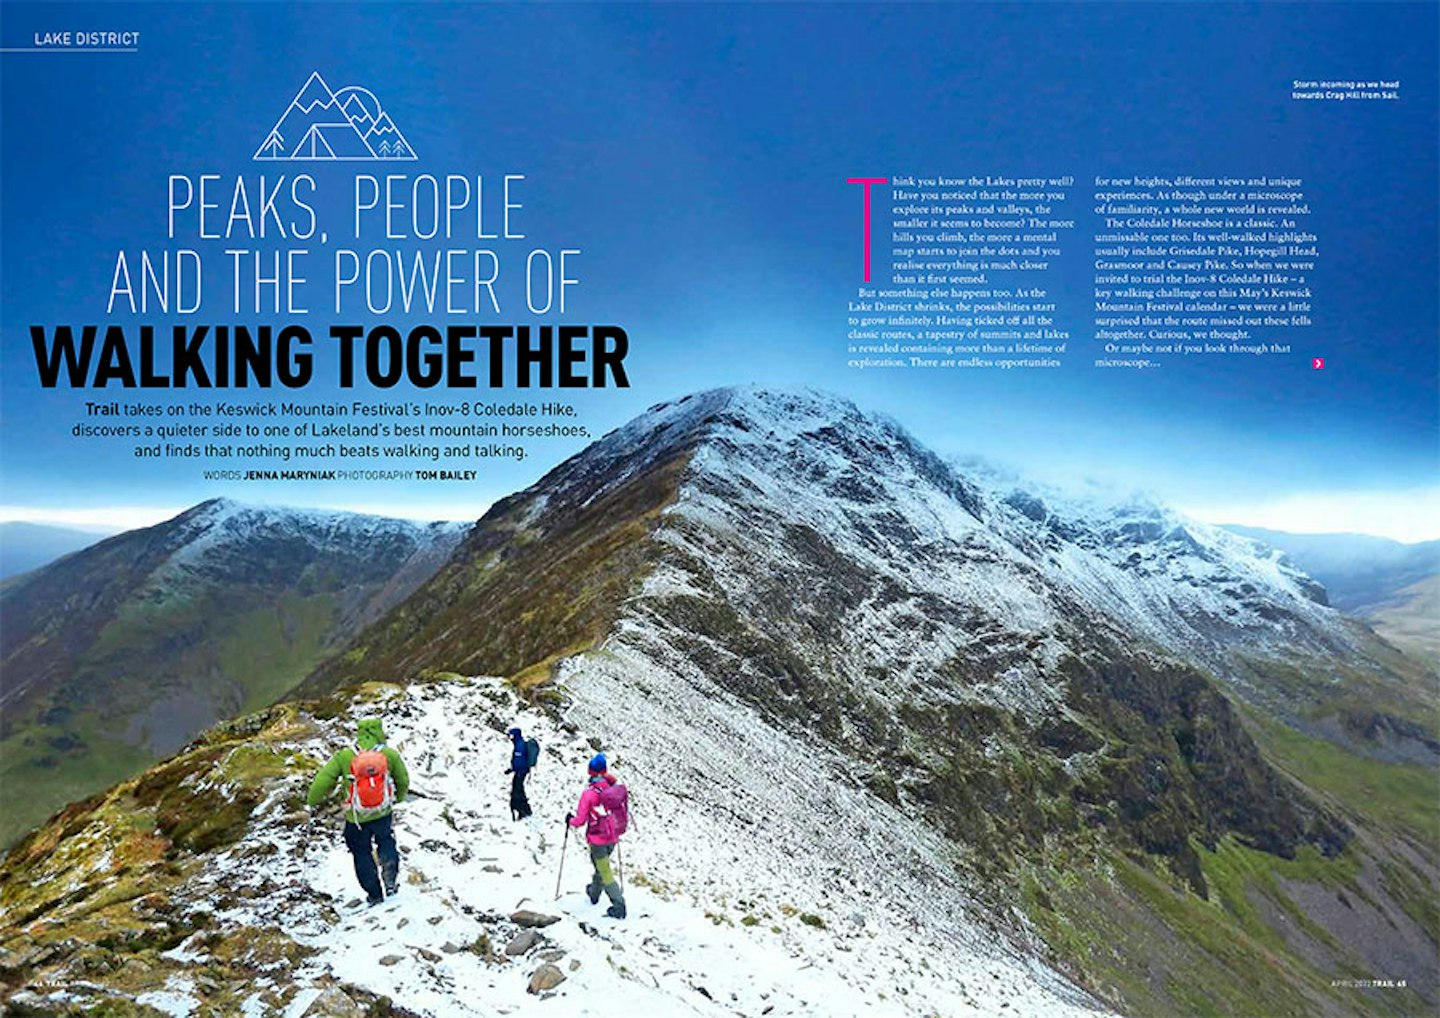 Peaks, people and the power of walking together